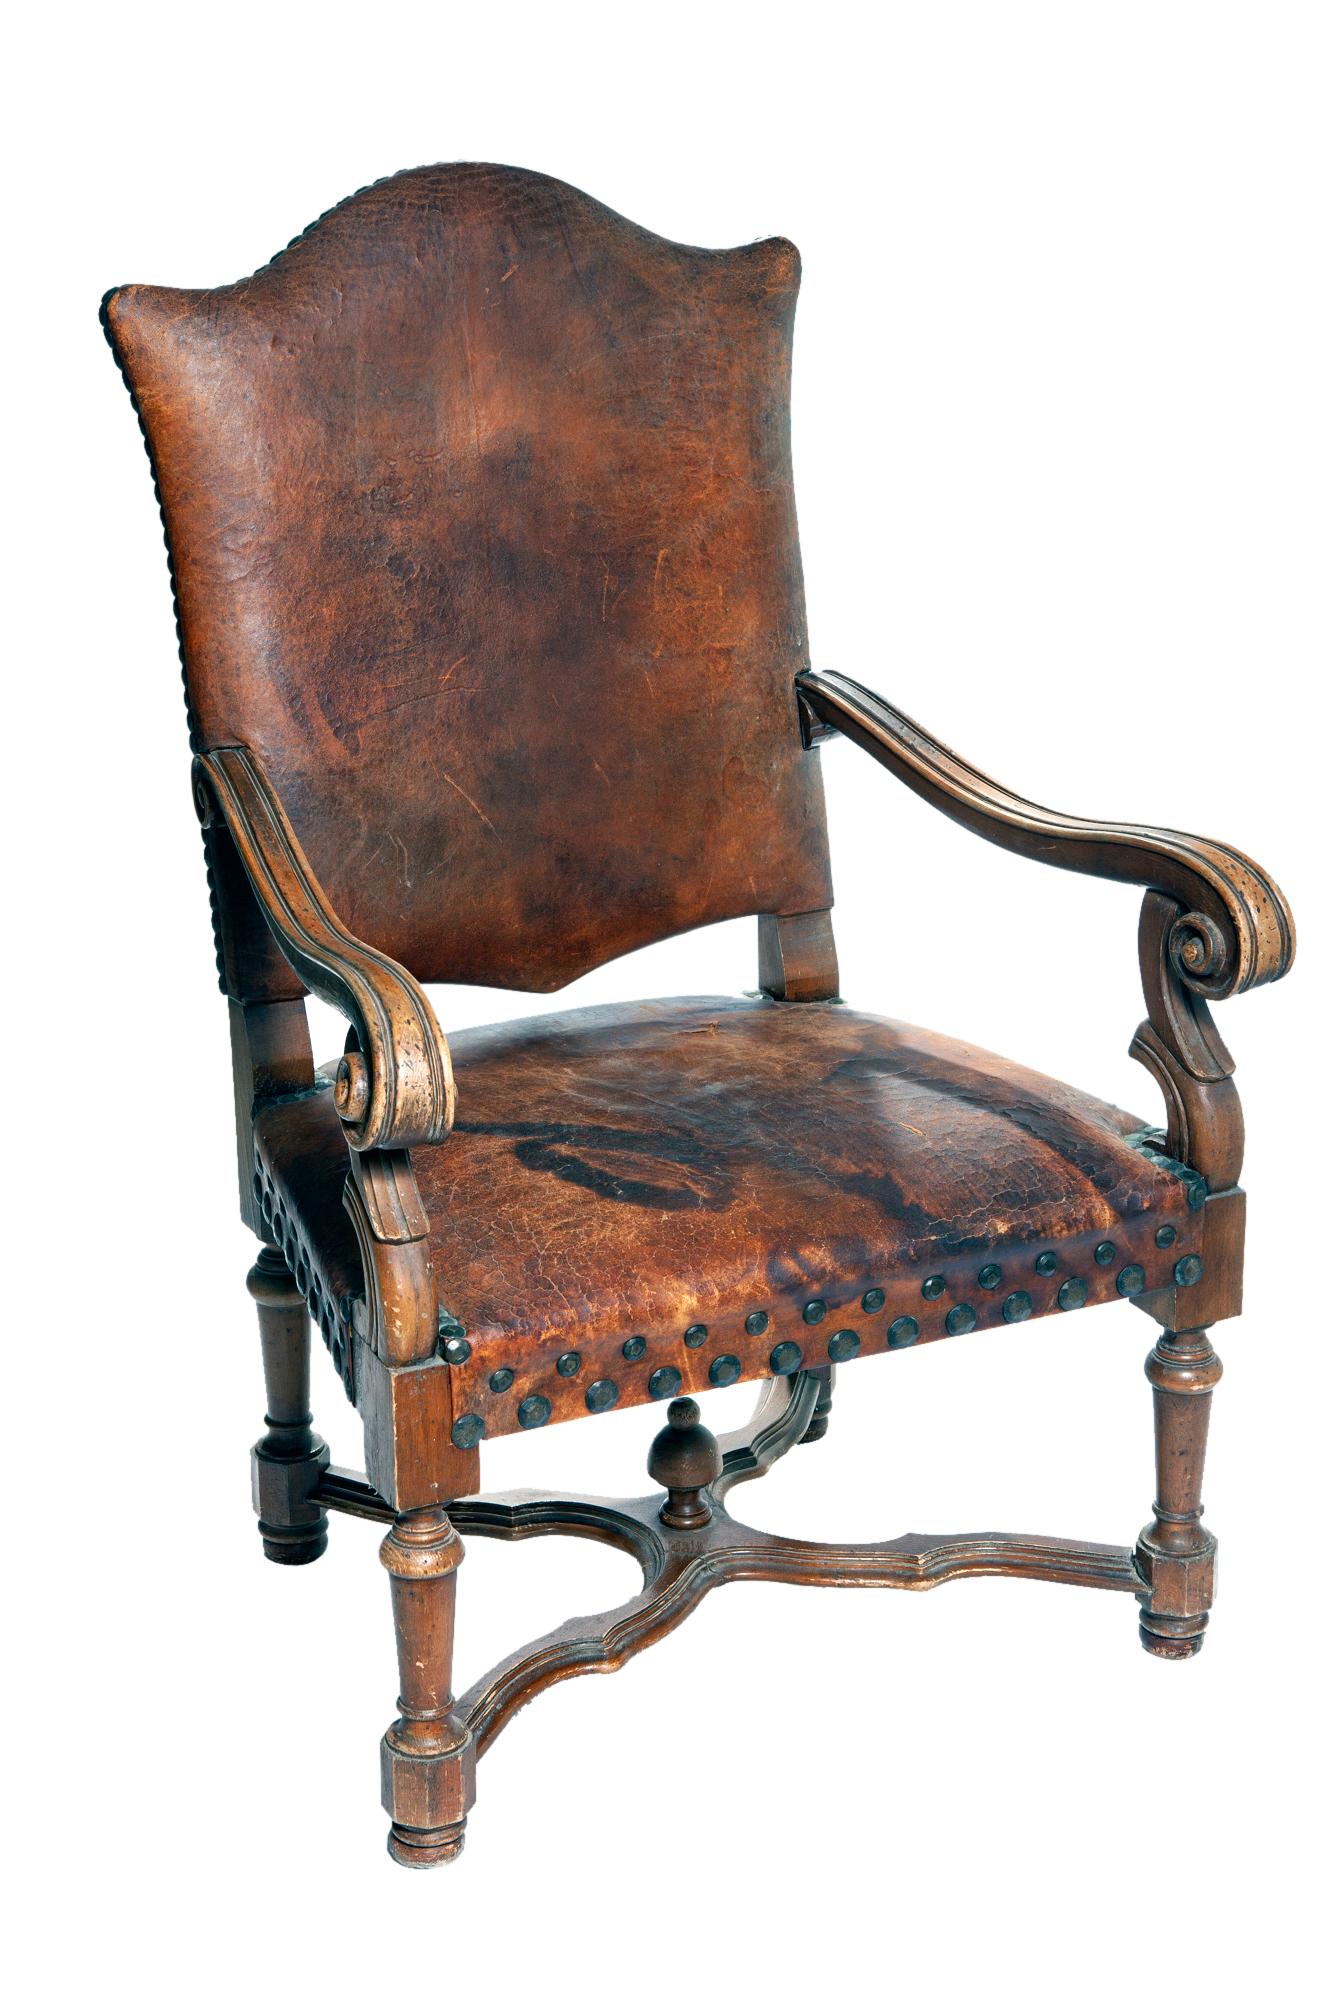 A gentleman's occasional European leather armchair with leather seat & back adorned with oversized antique brass studs/nailheads.Perfect for the library and or study. Comfortable & sturdy. There is a stain on the leather seat, see images for